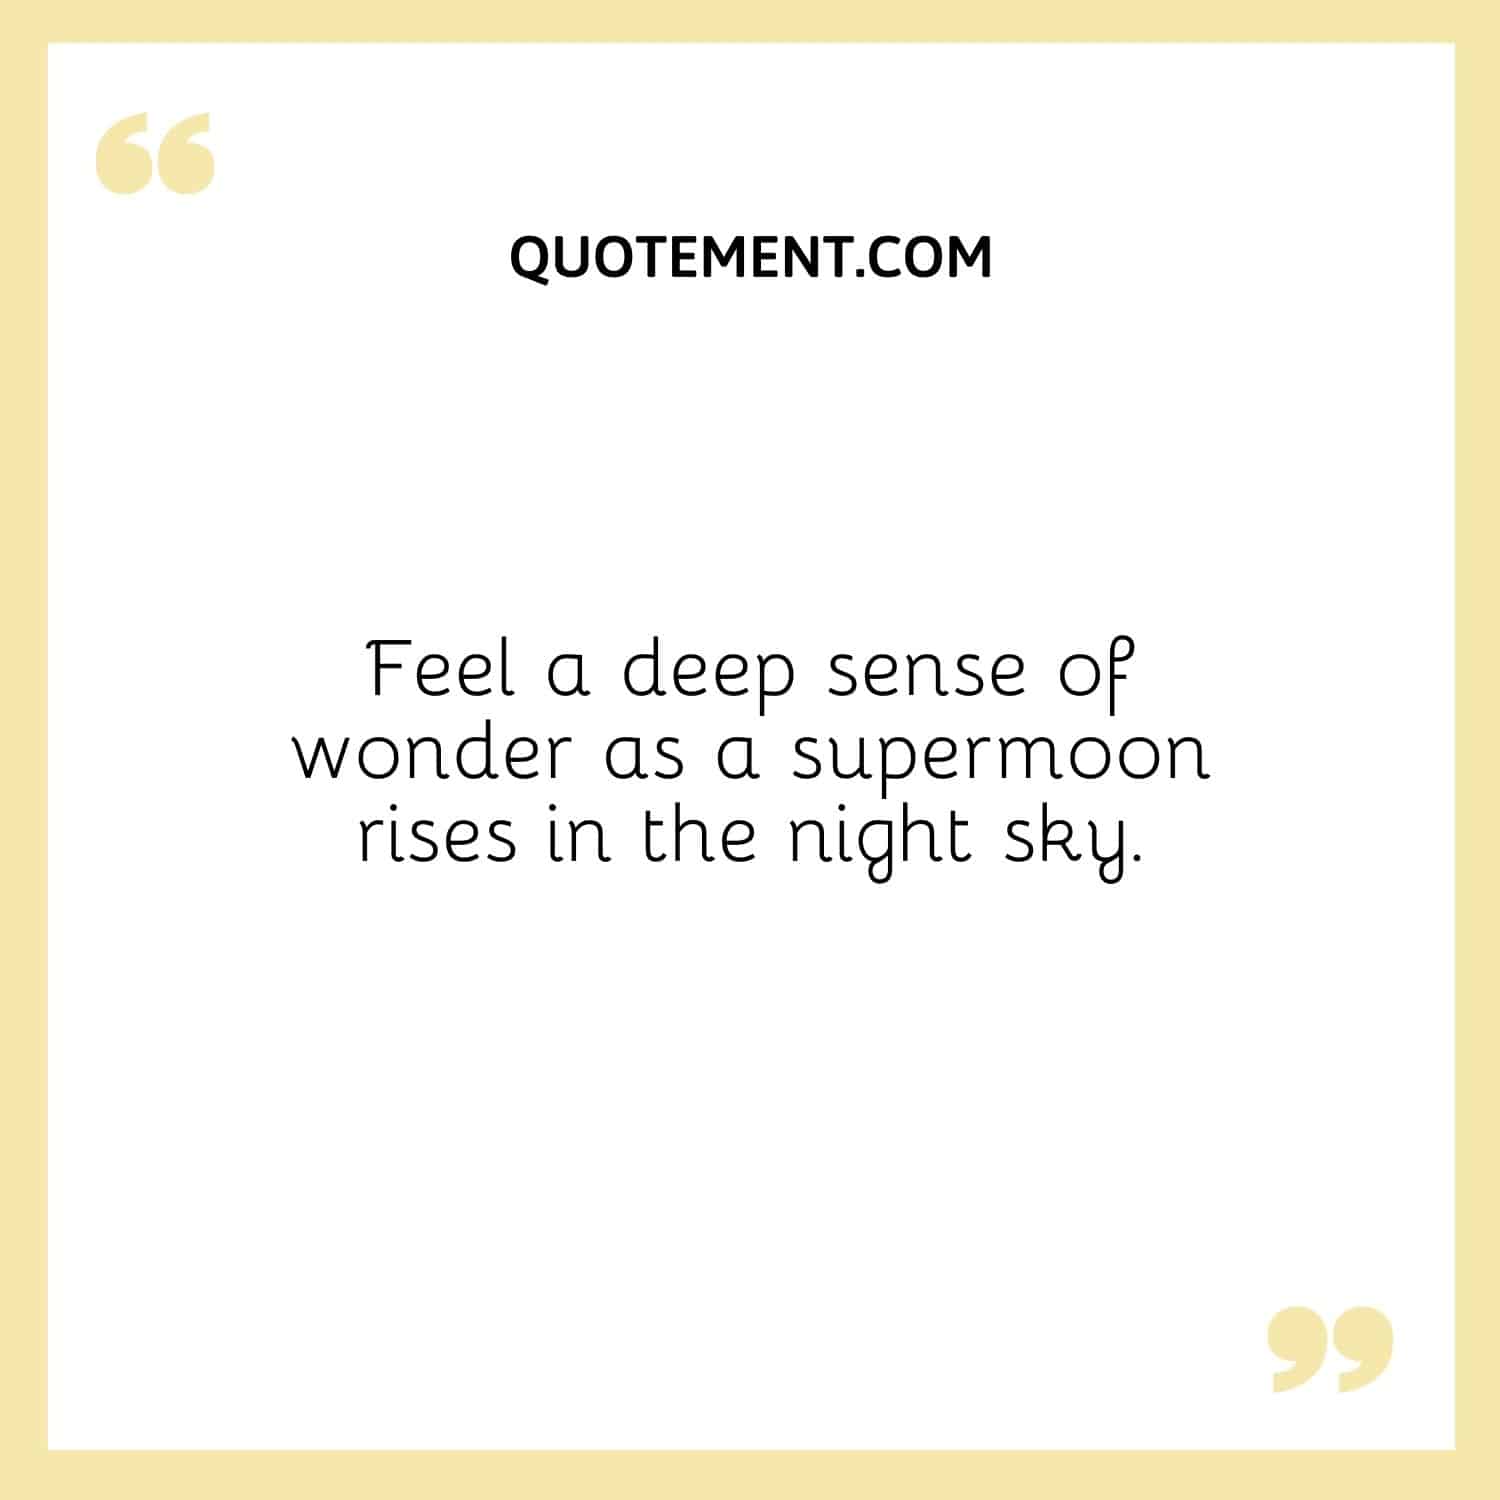 Feel a deep sense of wonder as a supermoon rises in the night sky.